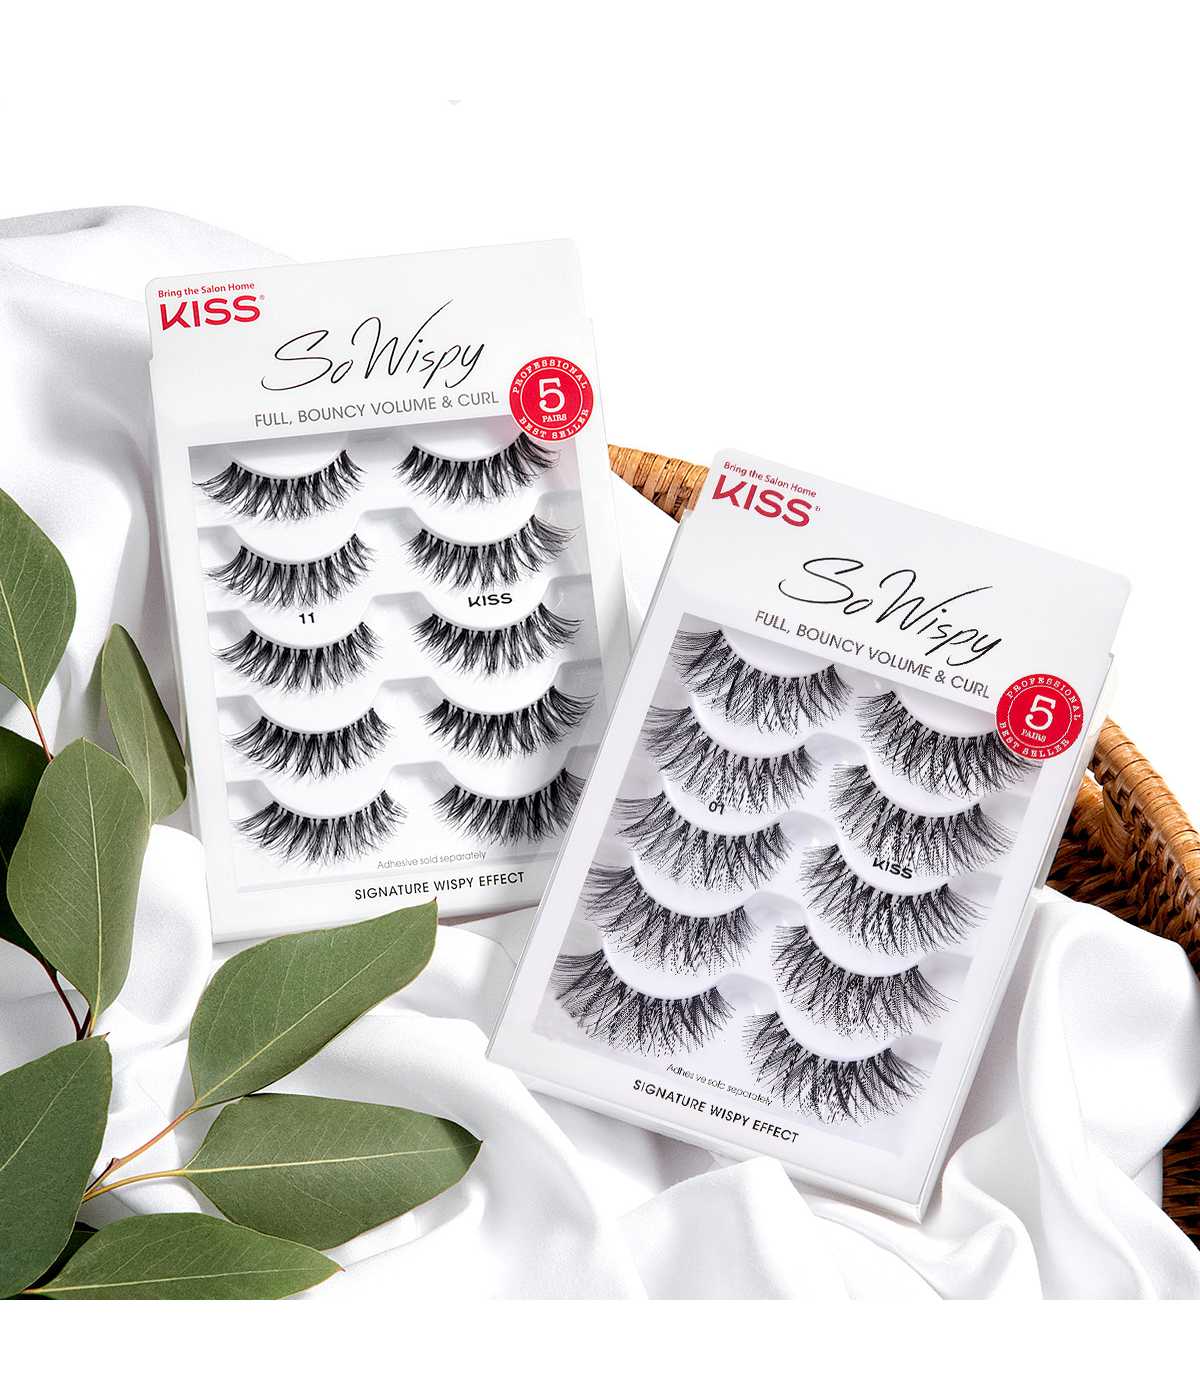 KISS So Wispy Lashes; image 6 of 6